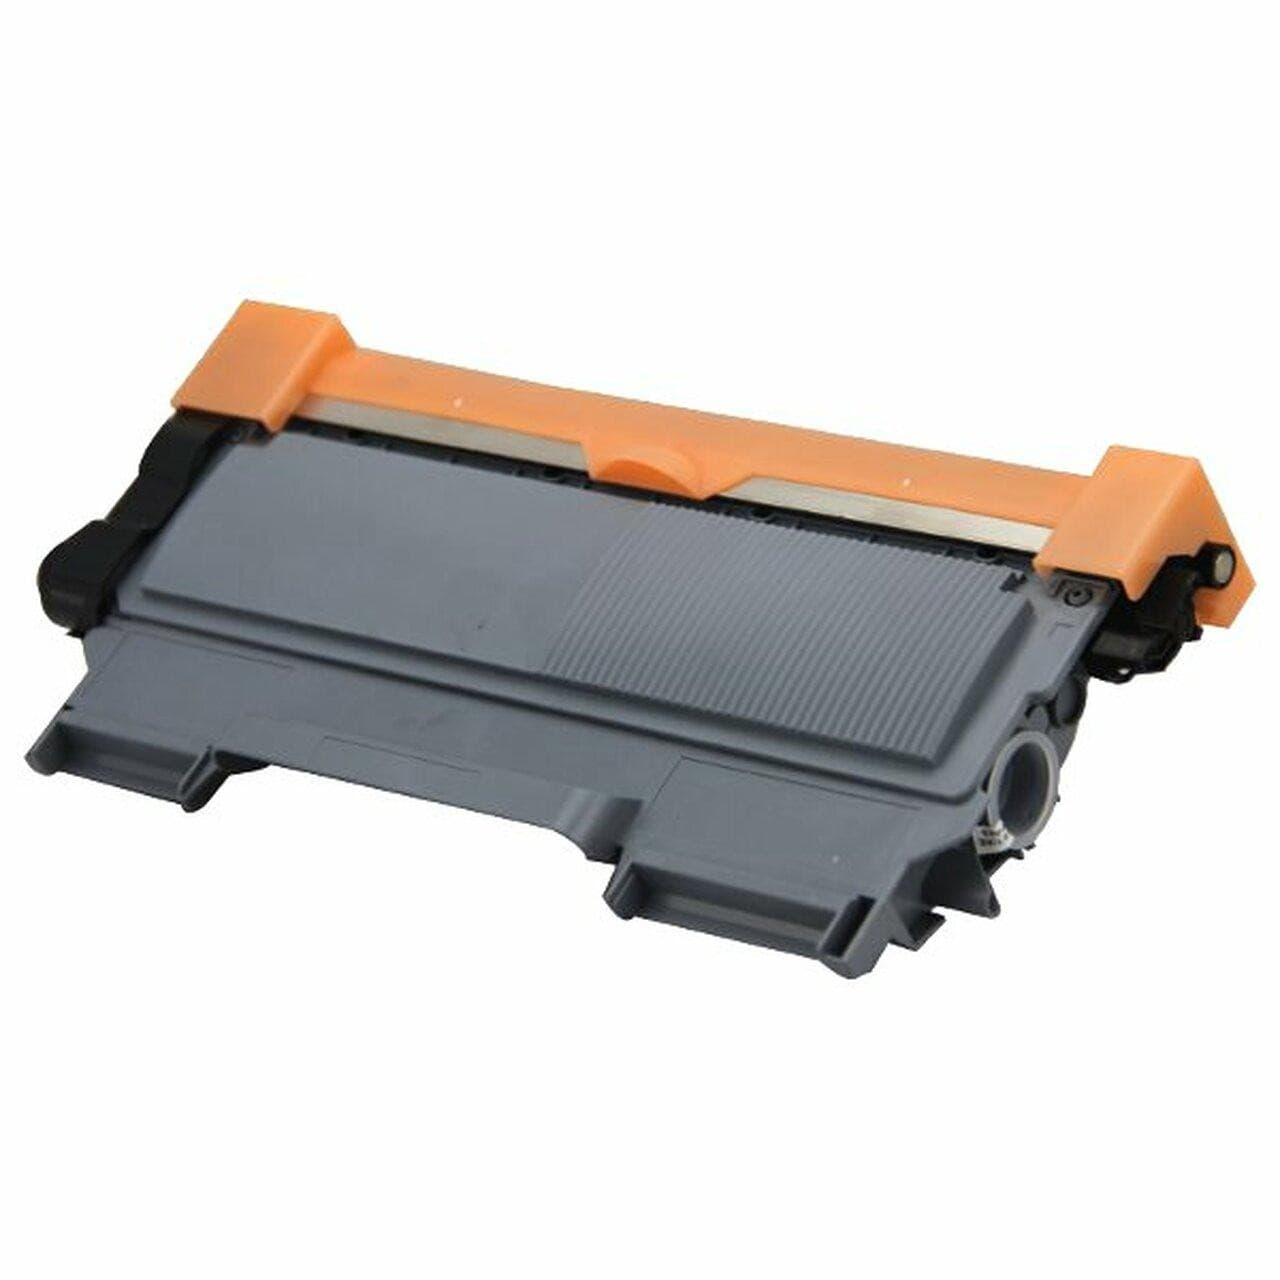 3x TN-2250 TN2250 toner cartridge for Brother MFC-7360N MFC-7362N MFC-7860DW - Office Catch